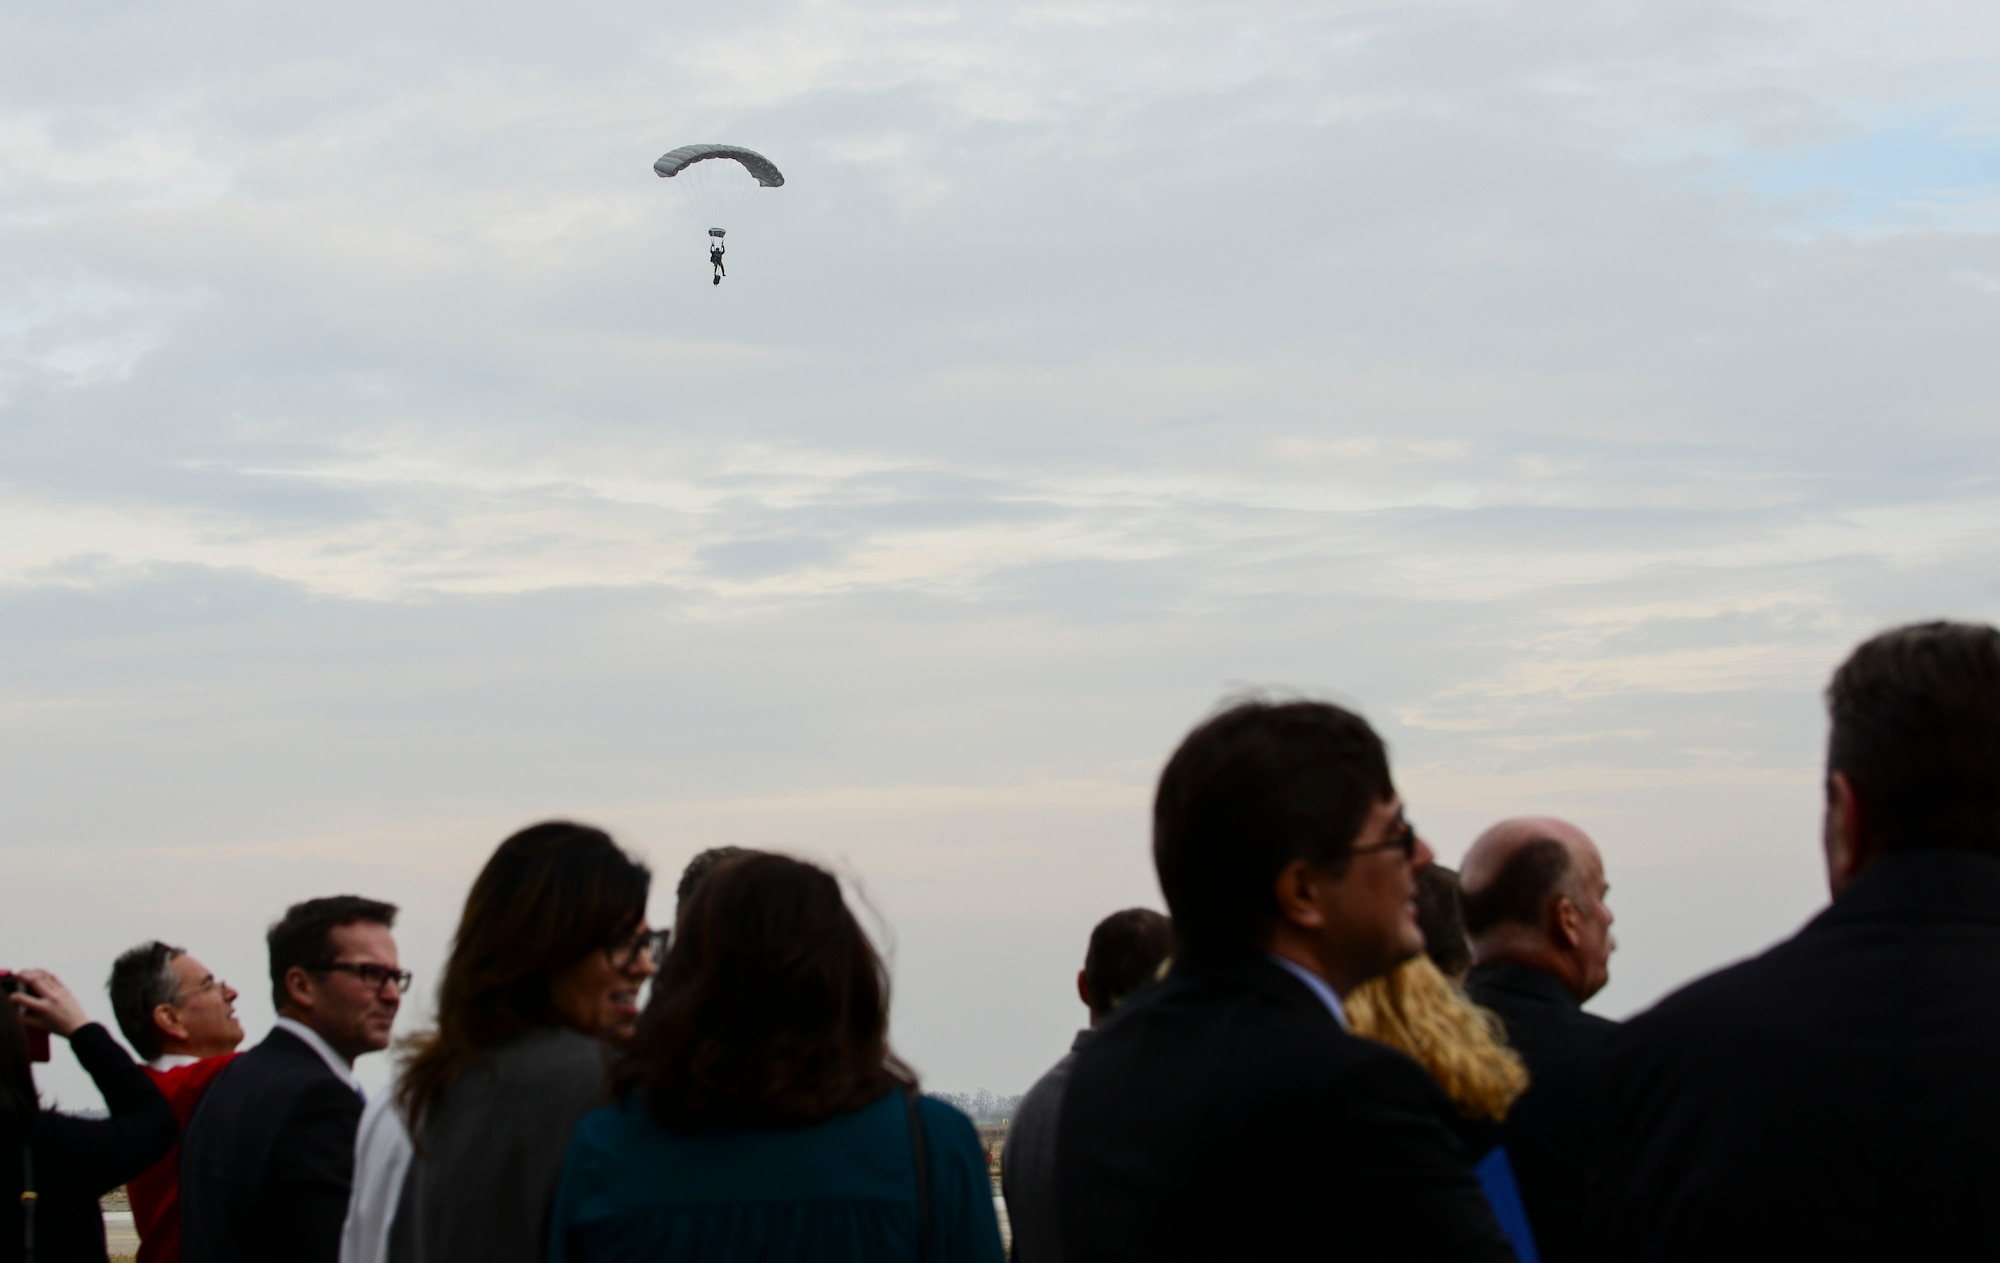 A Swedish Armed Forces Parachute Unit paratrooper performs a parachute demonstration during the C-17 Globemaster III grand opening at Pàpa Air Base, Hungary on Nov. 17, 2016. The Swedish paratroopers demonstrated the HAWs ability to insert special forces units into hostile environments through their fleet of three C-17 Globemaster IIIs. (U.S. Air Force photo by Staff Sgt. Krystal Ardrey)